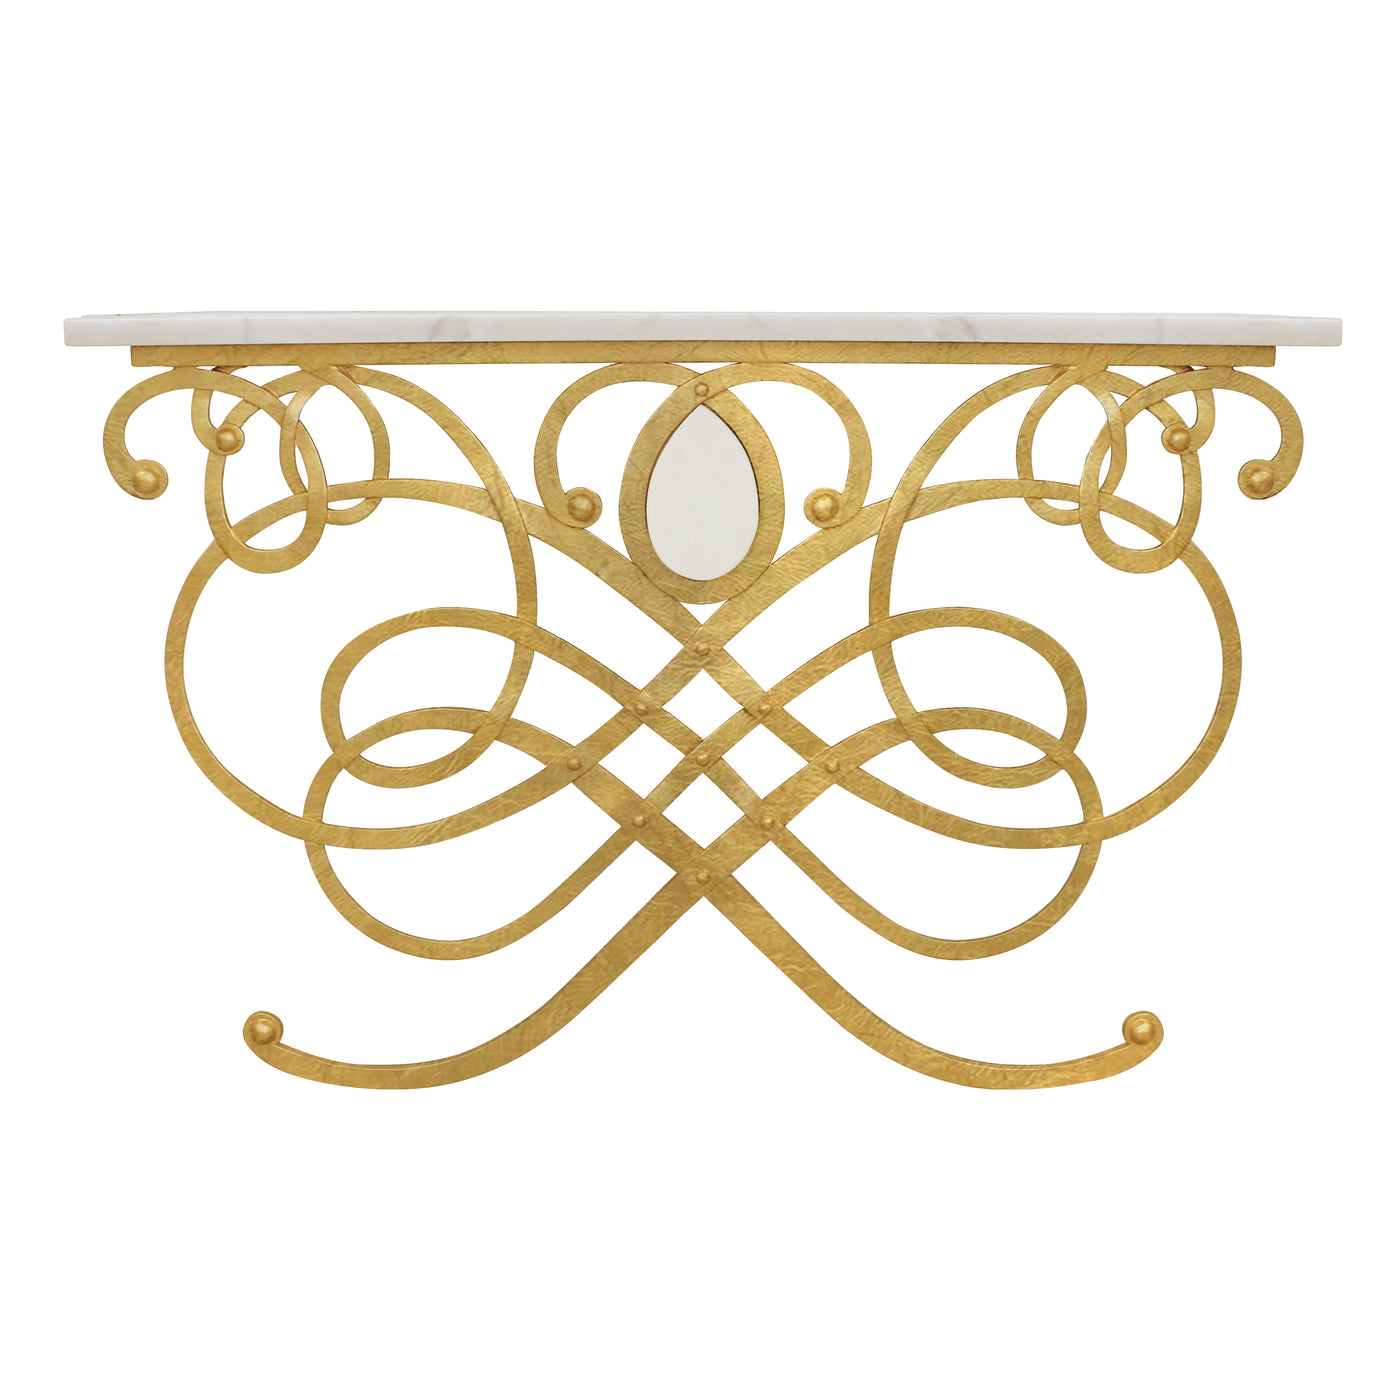 A luxurious metal forged console table inspired by musical notes in a gold leaf finish, topped with white marble